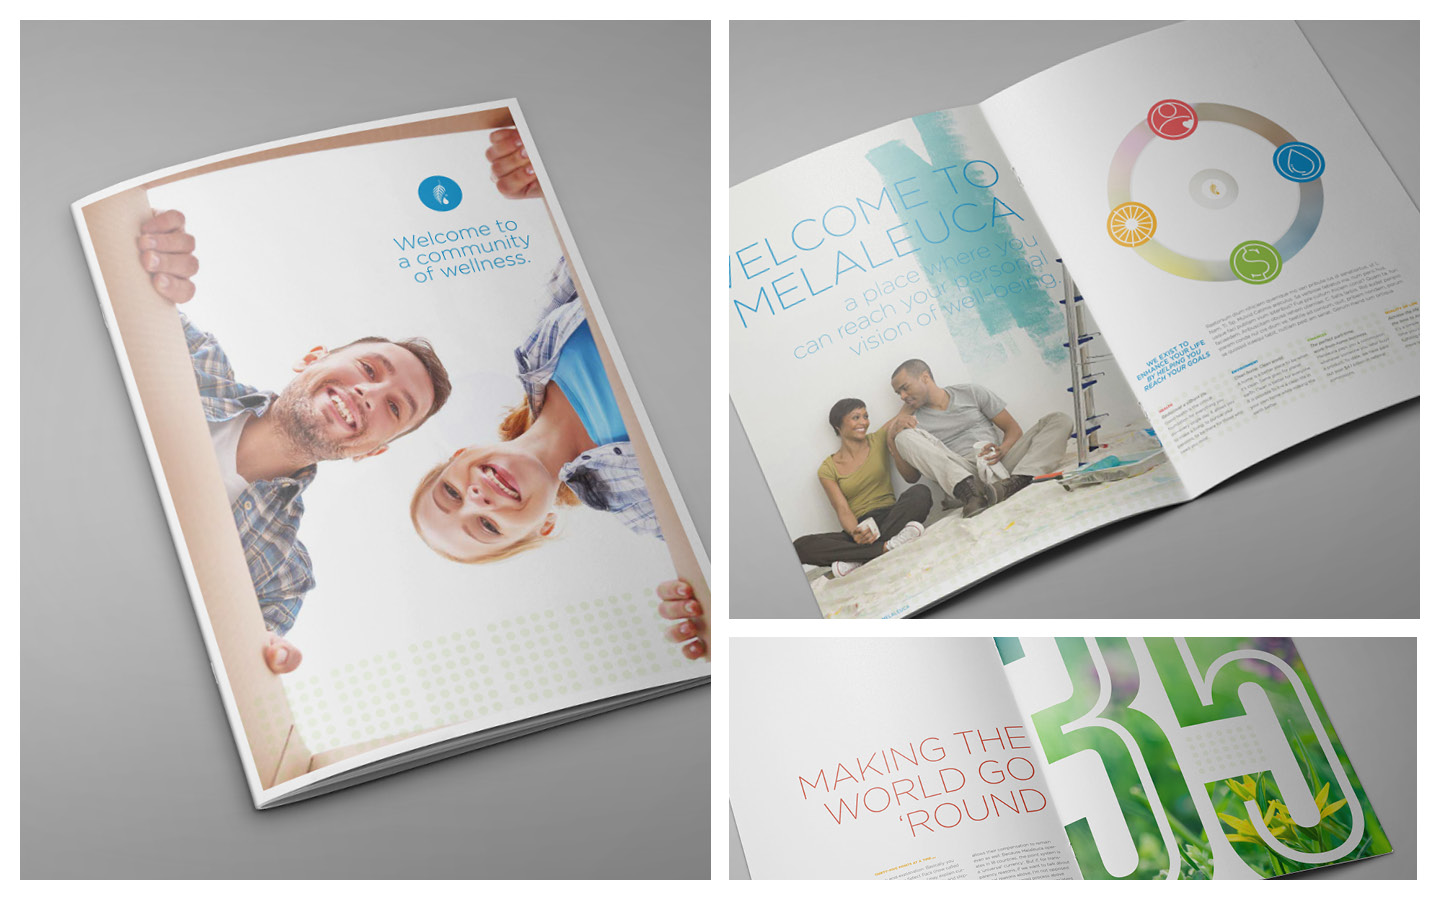 Concepts for New Customer Welcome Books